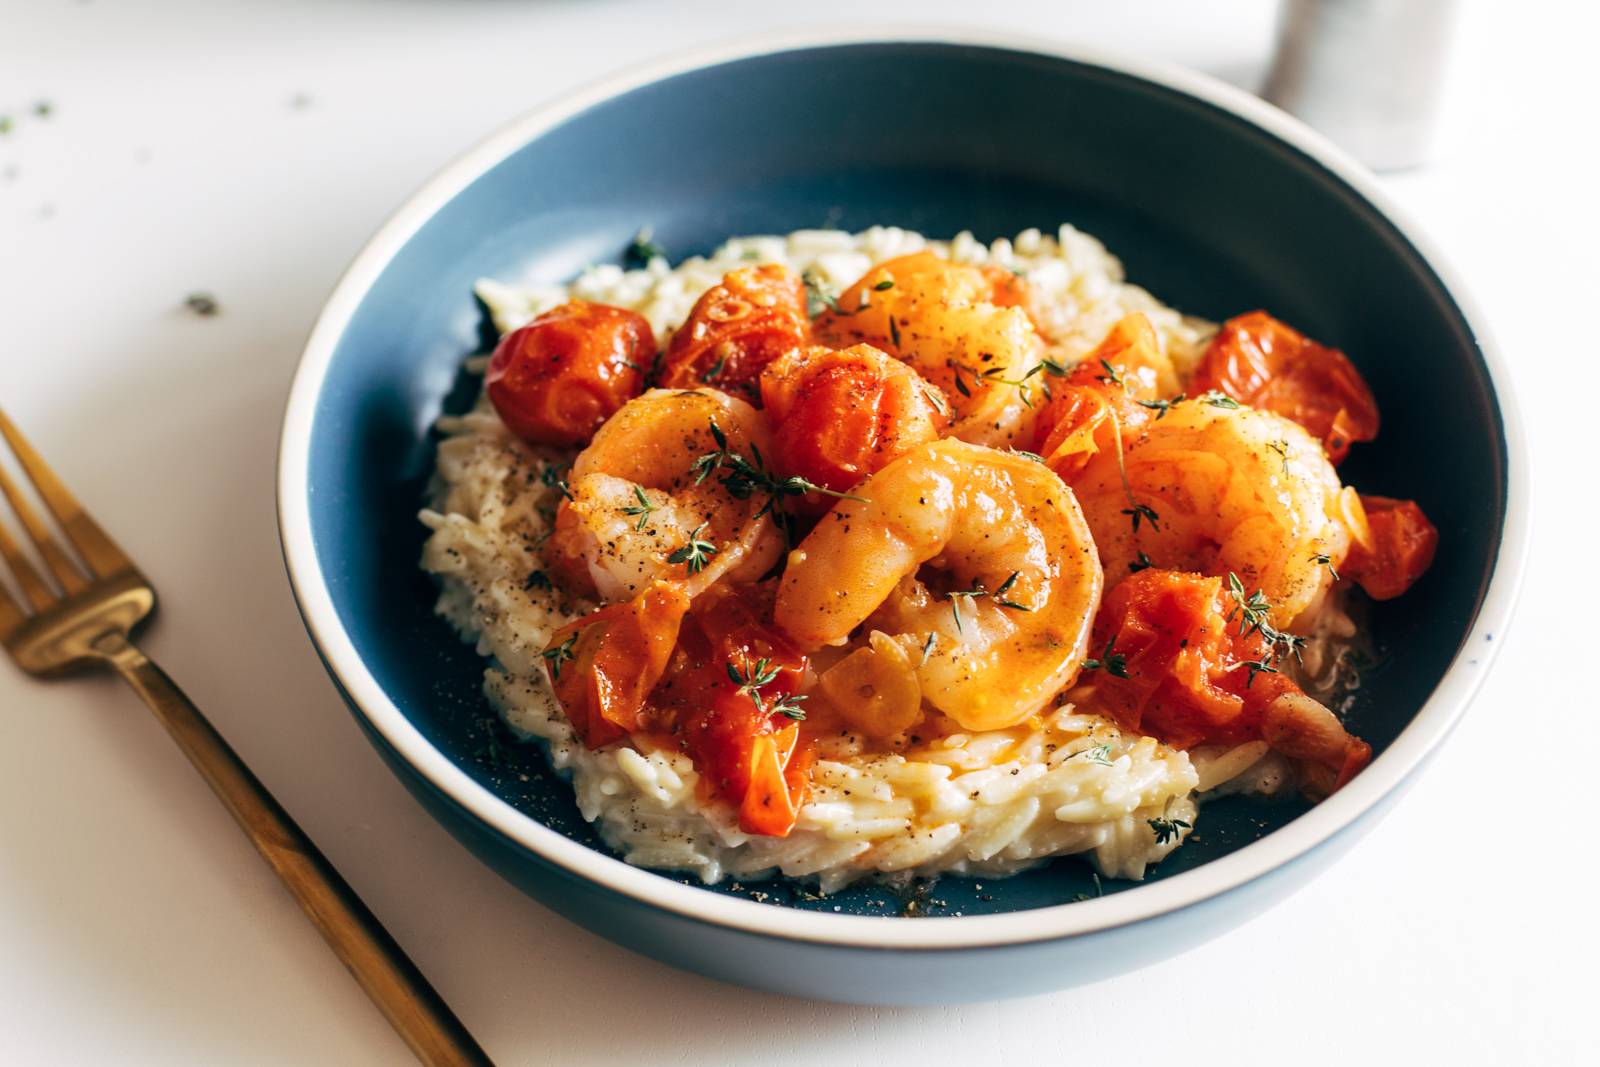 Ozro, shrimp, and tomatoes in blue bowl